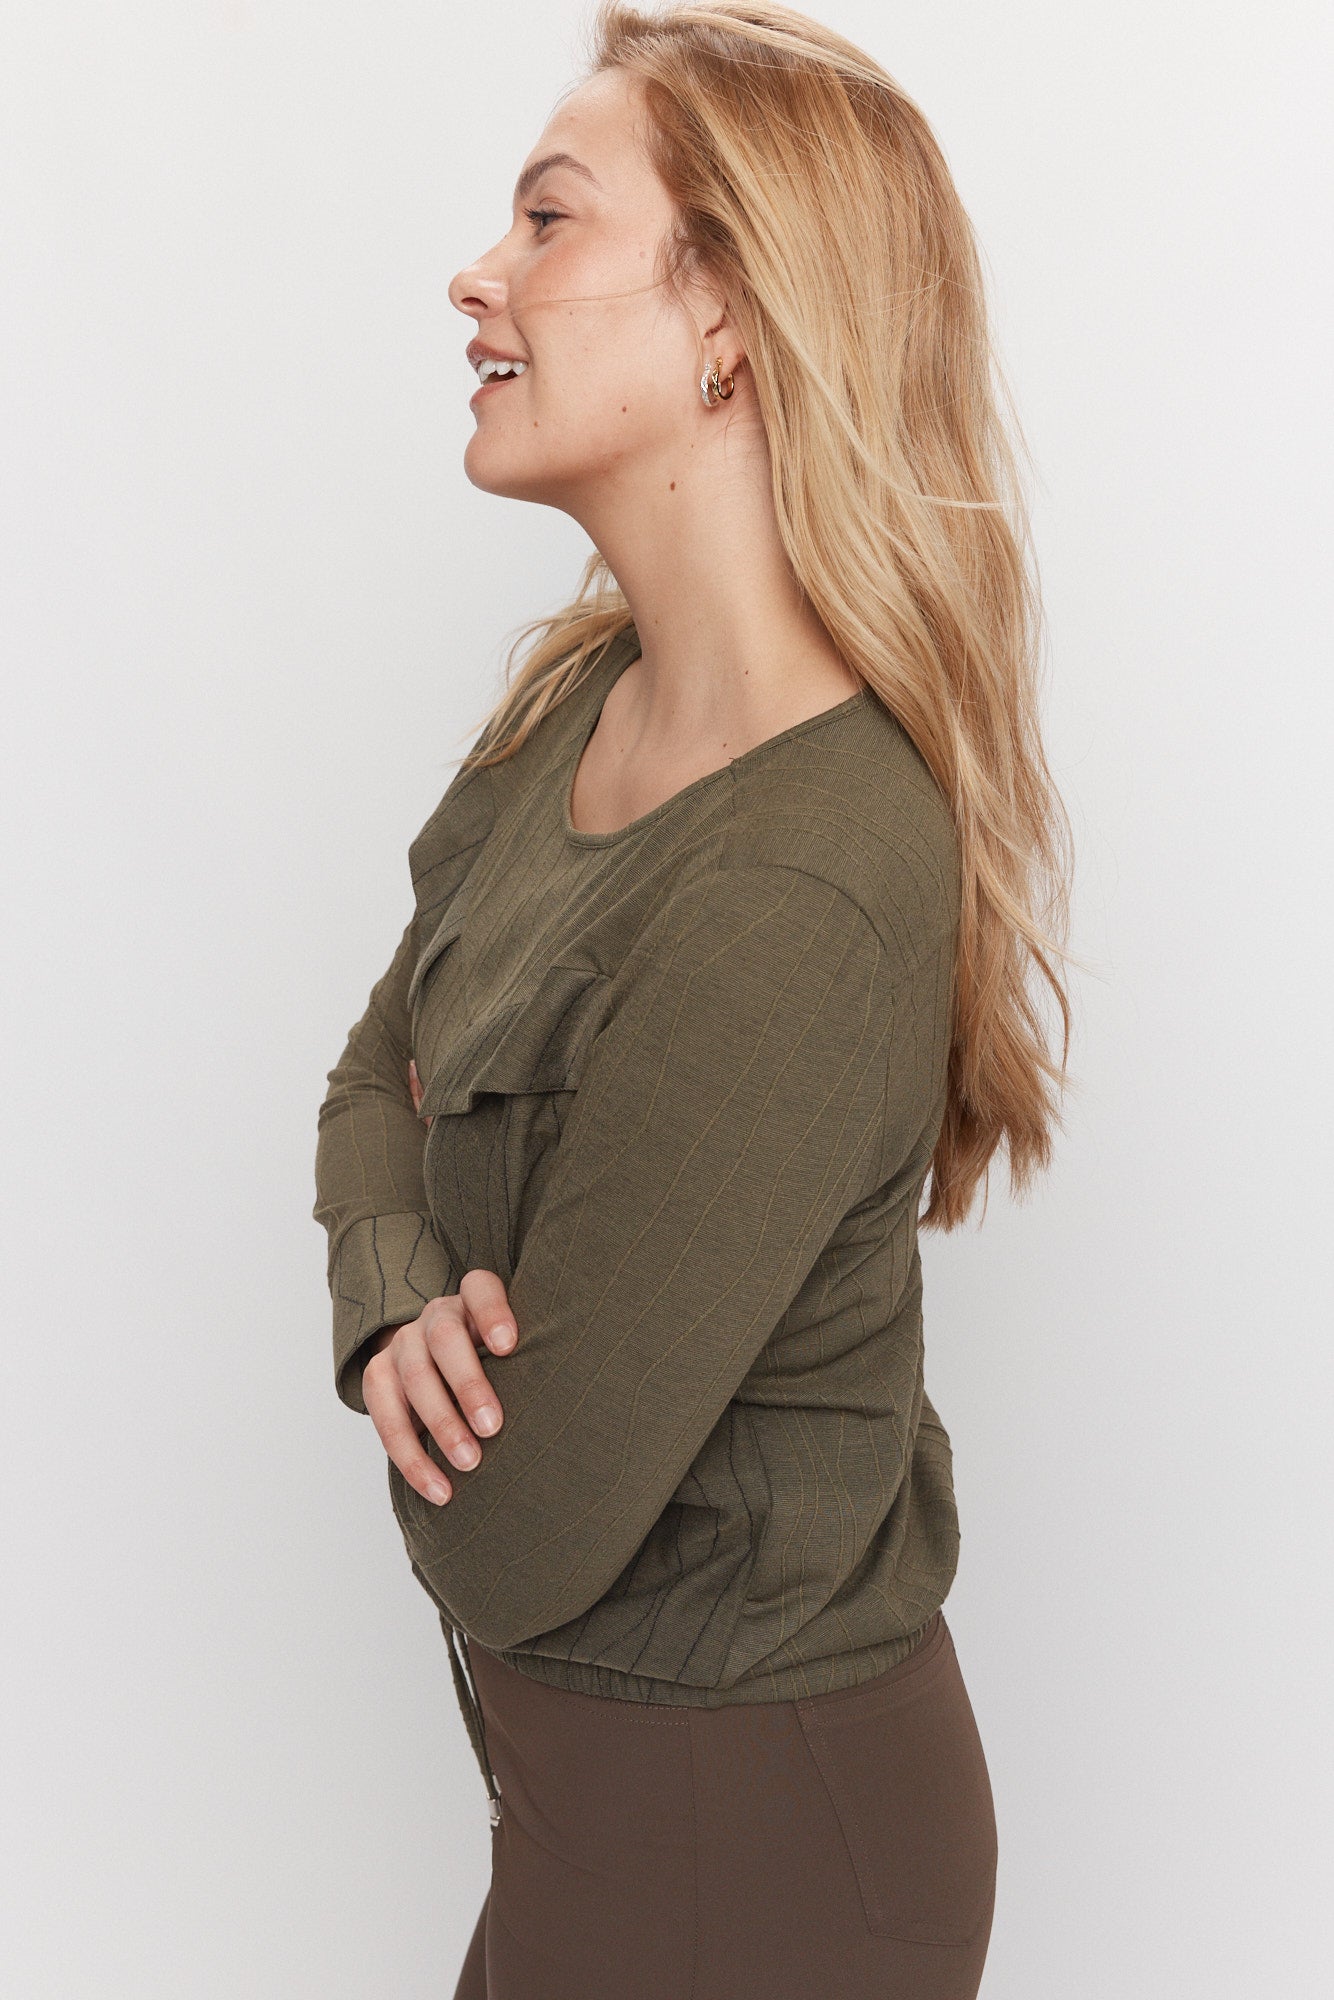 Green-brown sweater adjustable at the waist | Mulberry